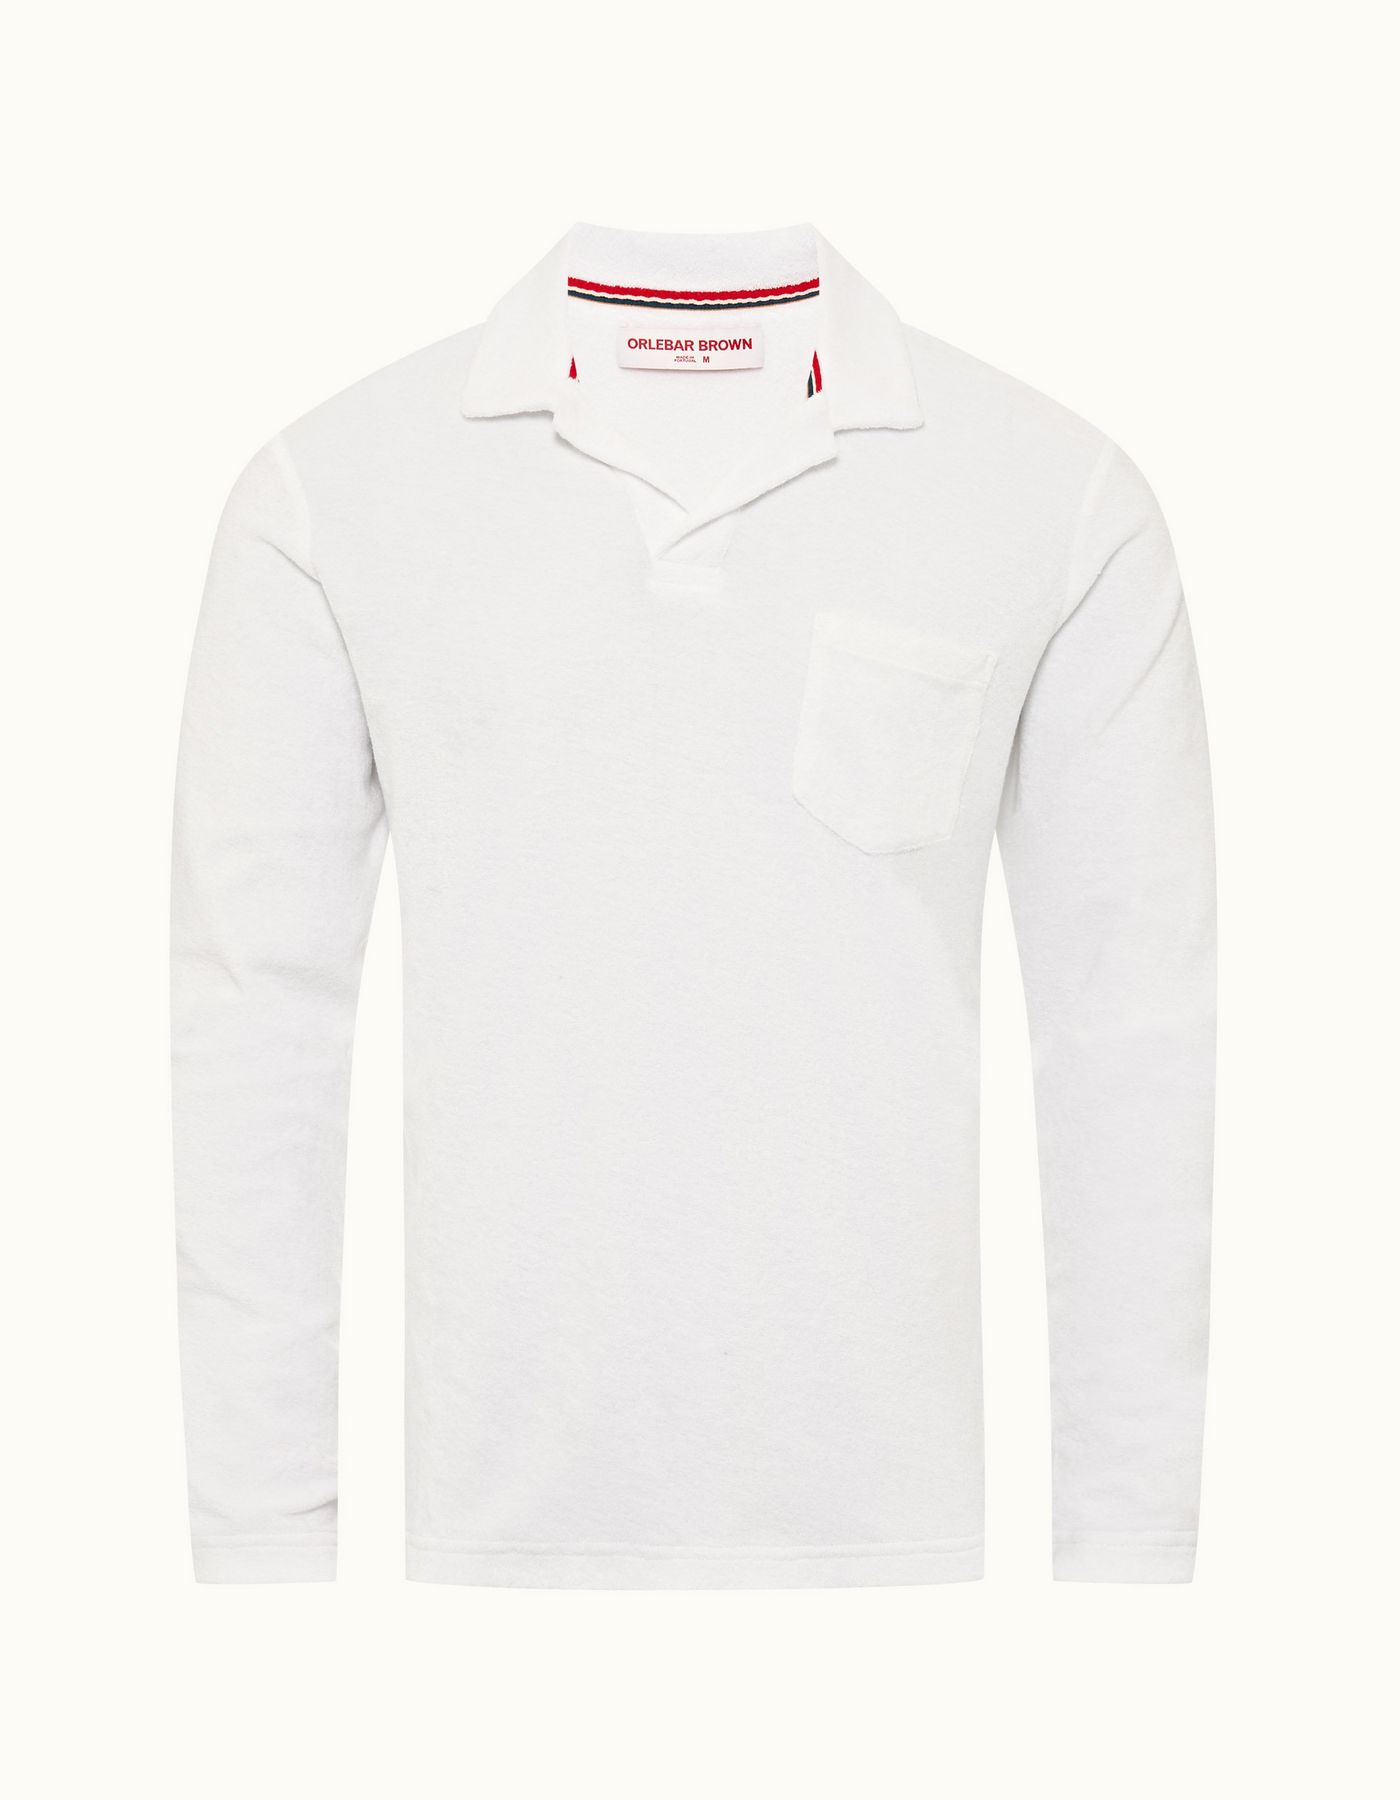 Terry Towelling - Mens White O.B Stripe Tailored Fit Long-Sleeve Towelling Resort Polo Shirt